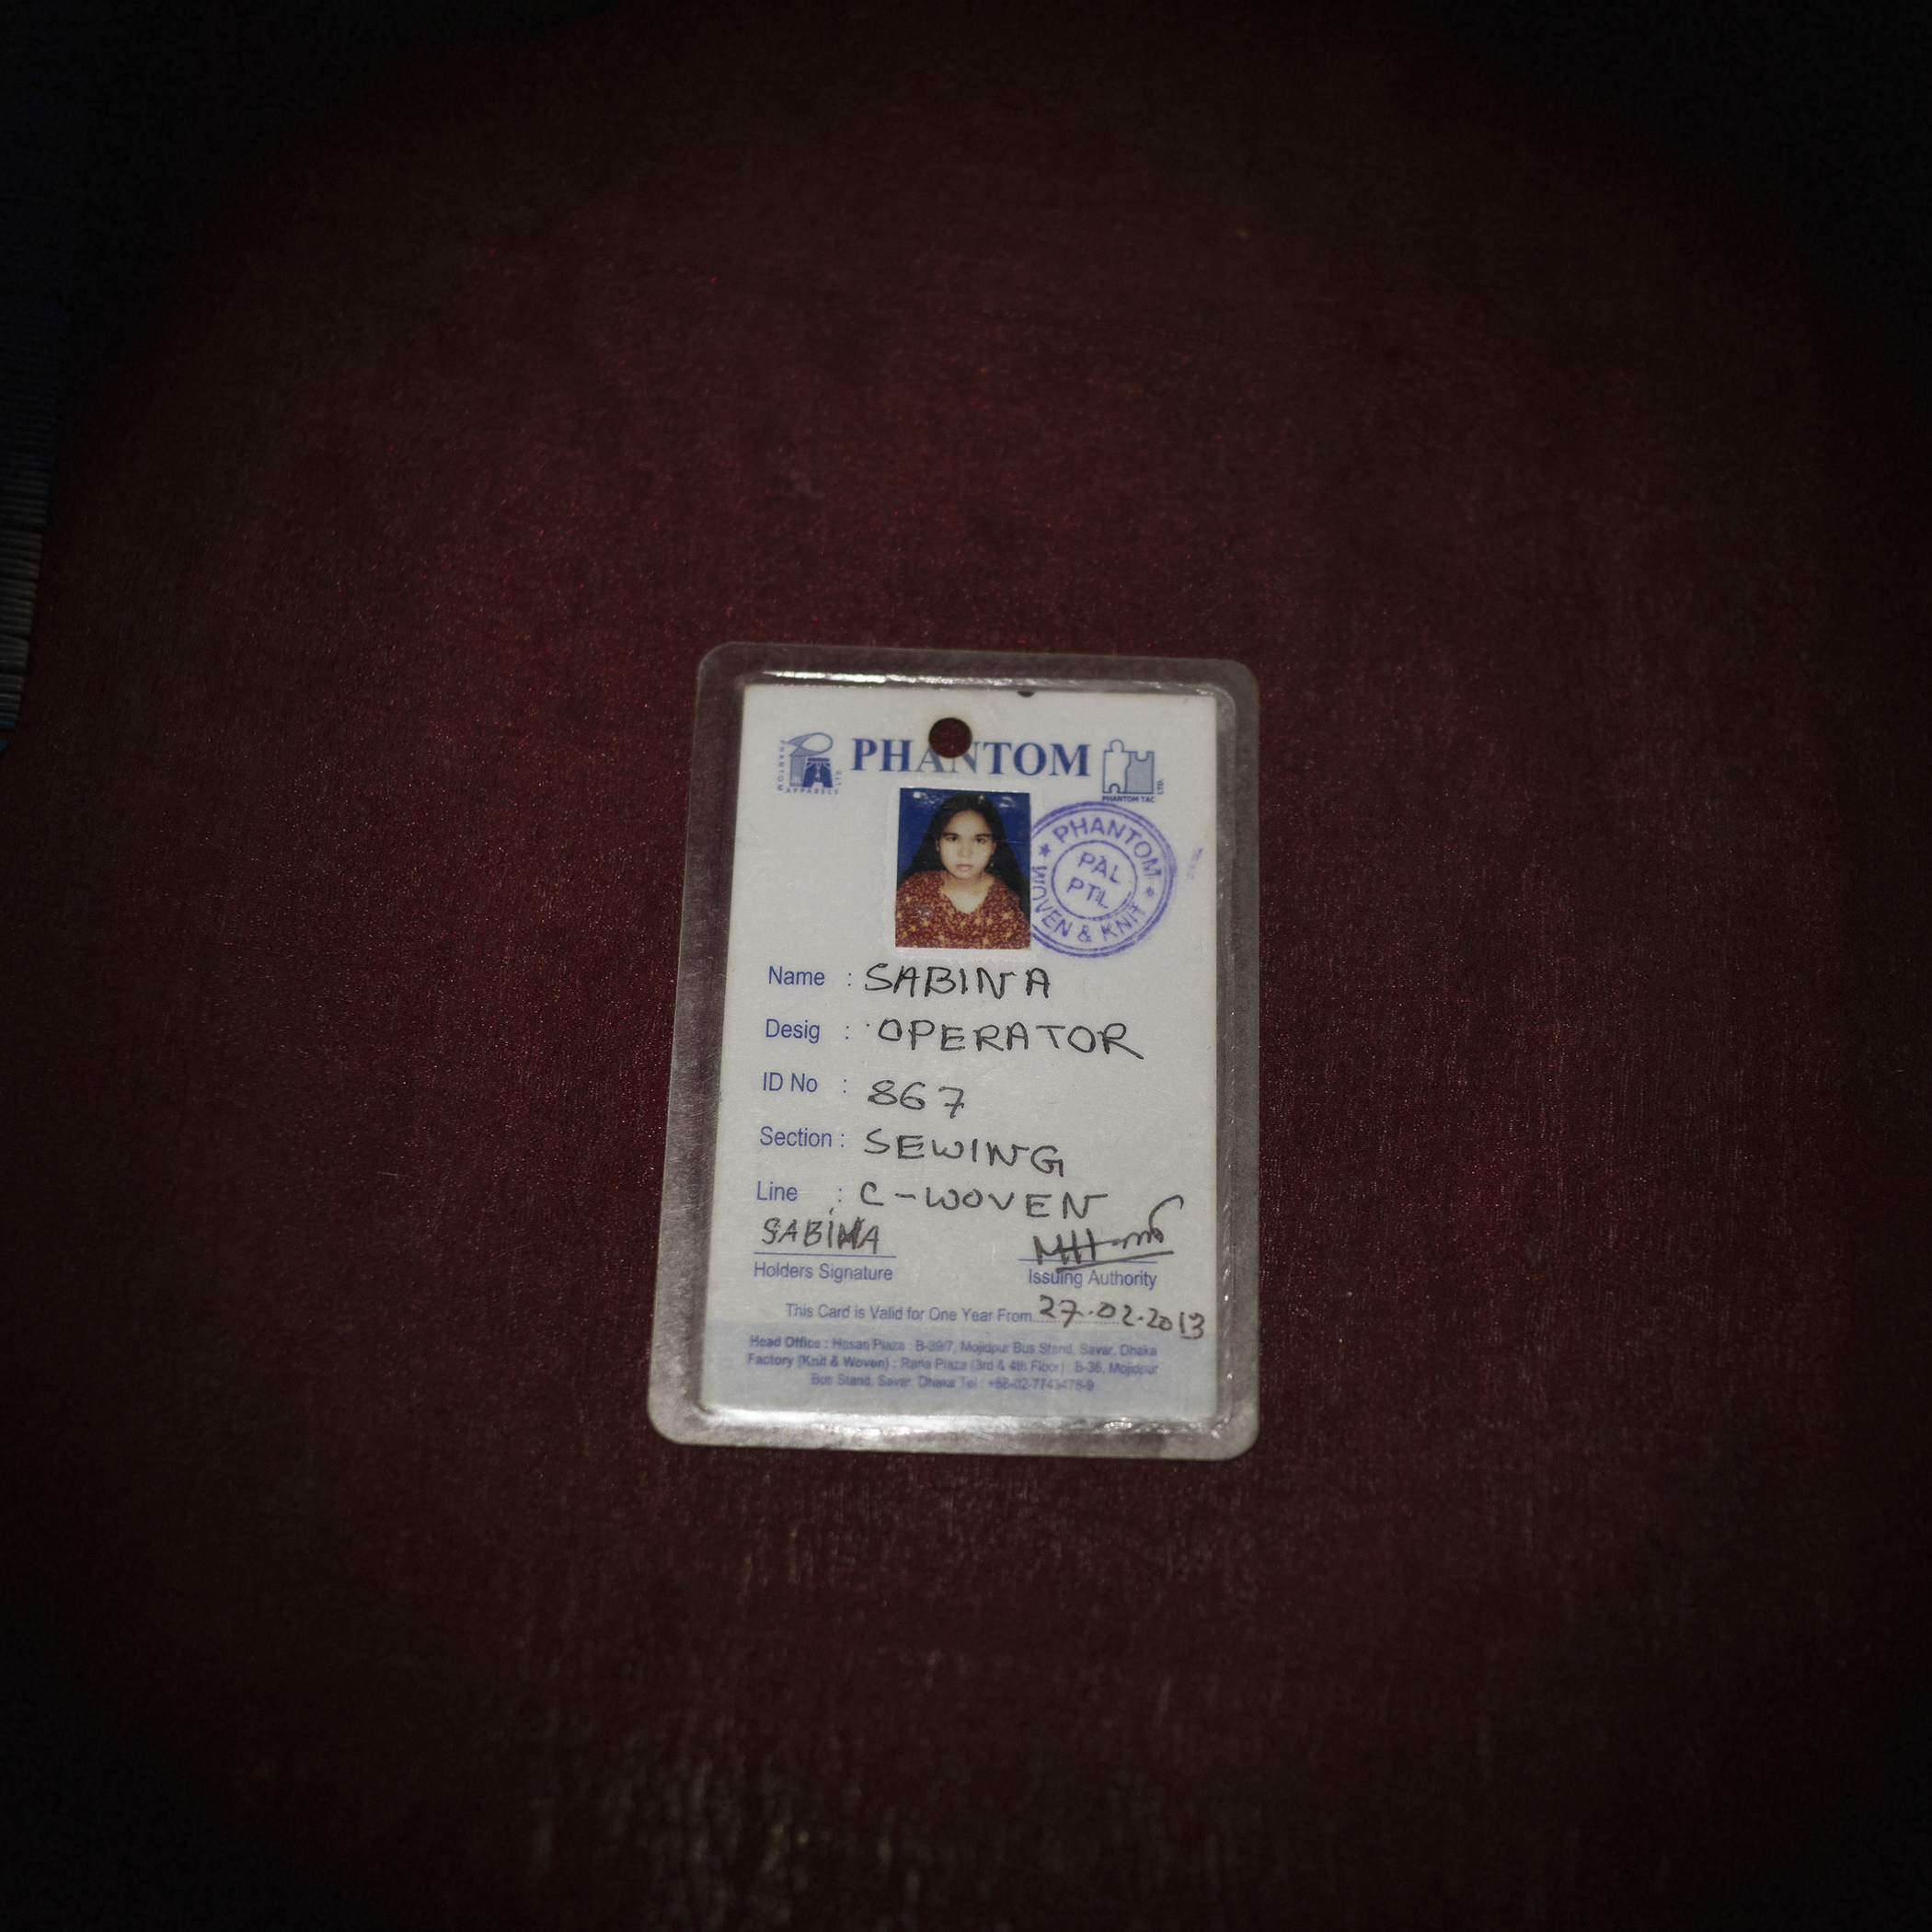 Sabina’s ID card from the factory, in which she worked for six years, in Rana Plaza.